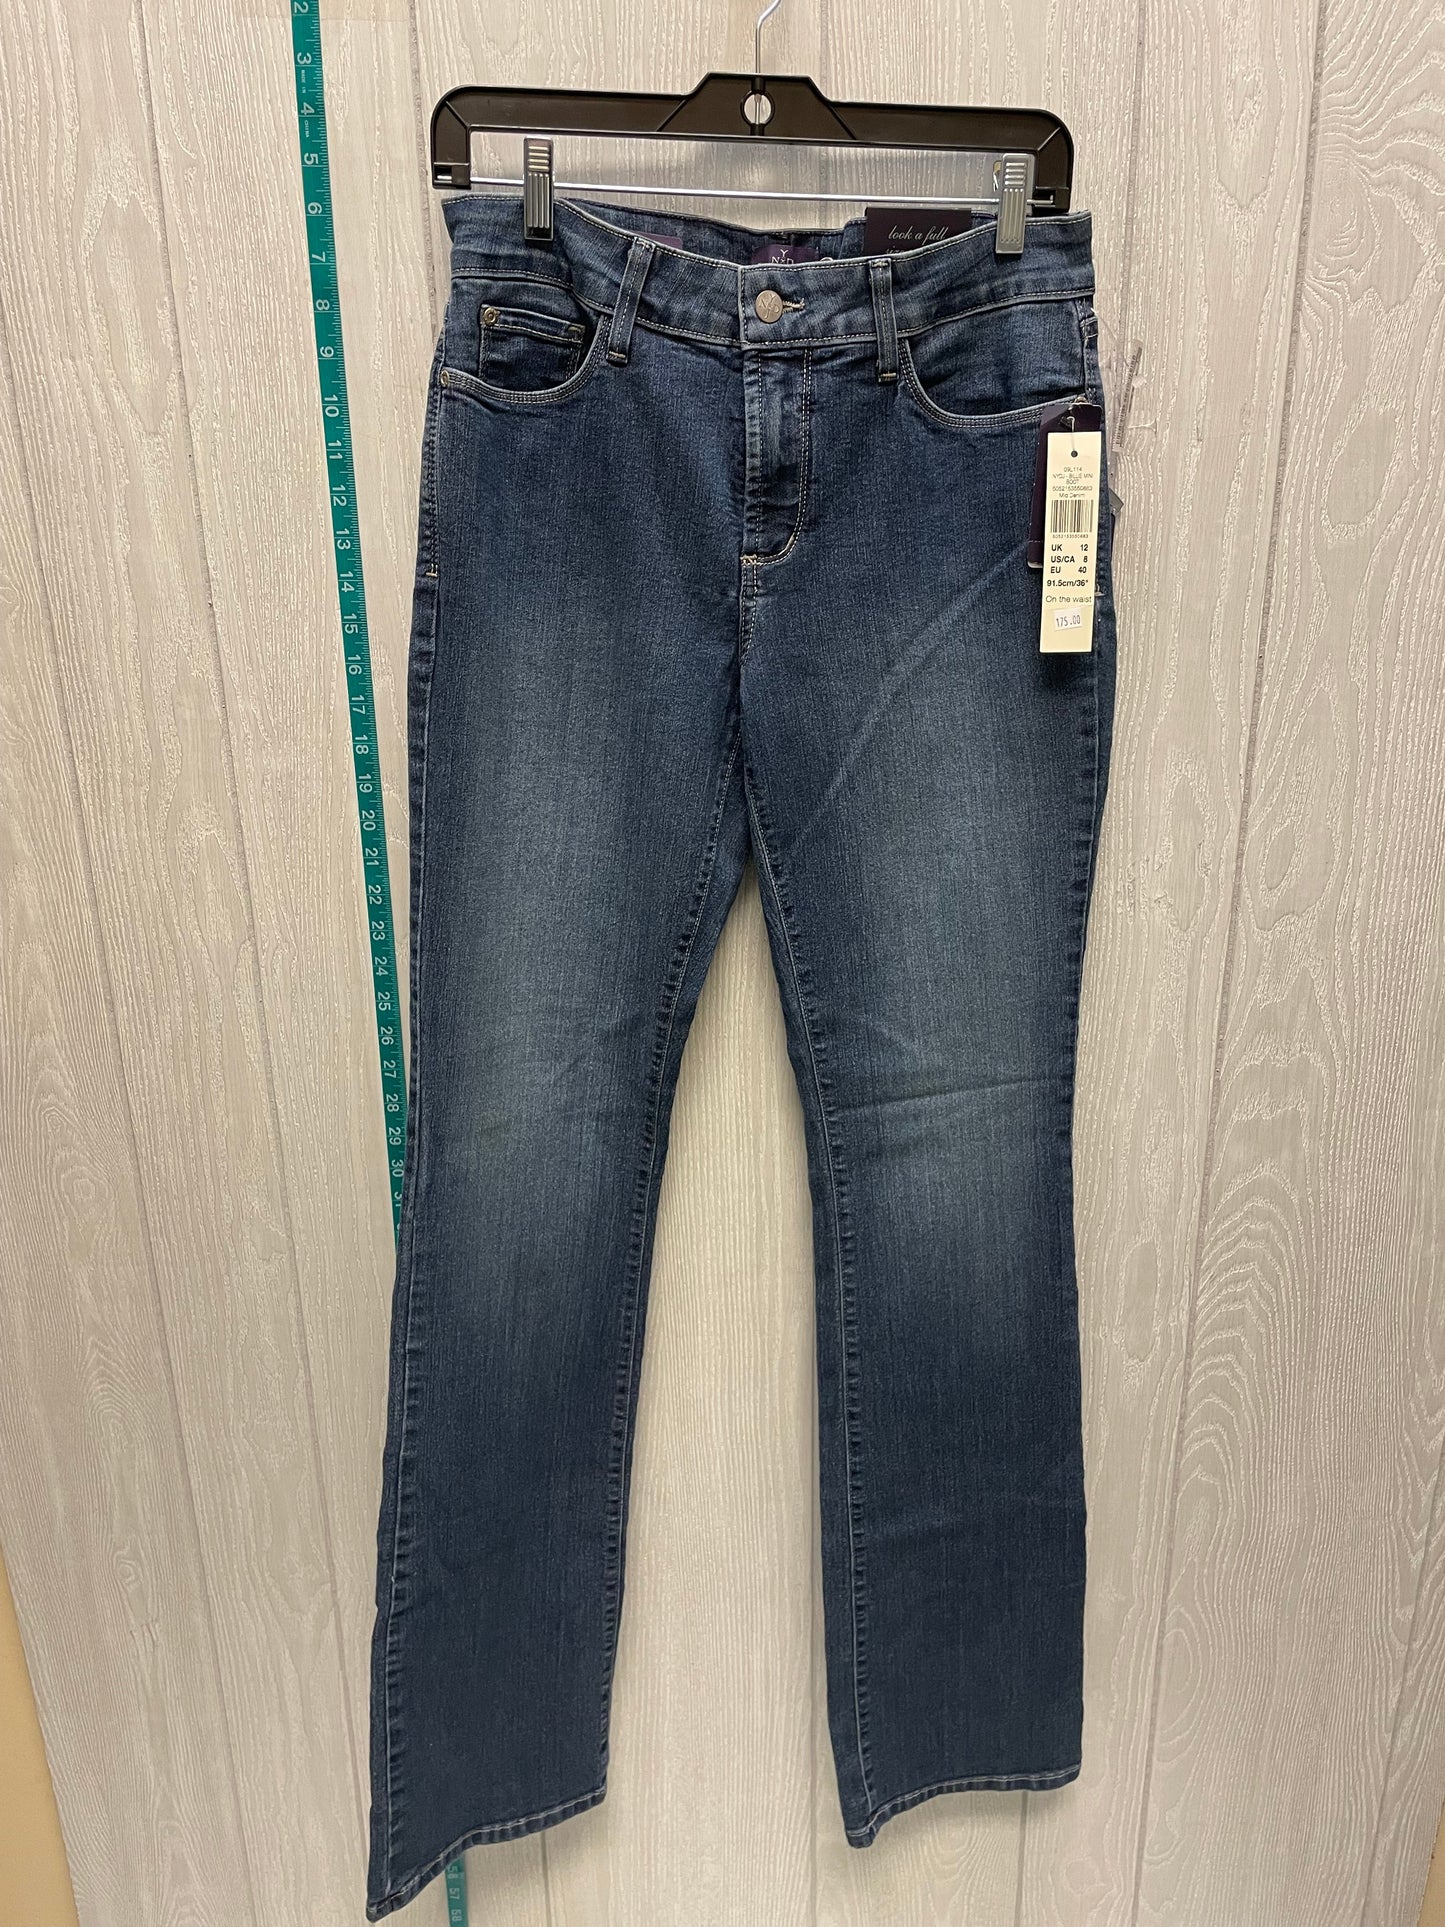 Blue Denim Jeans Boot Cut Not Your Daughters Jeans, Size 8